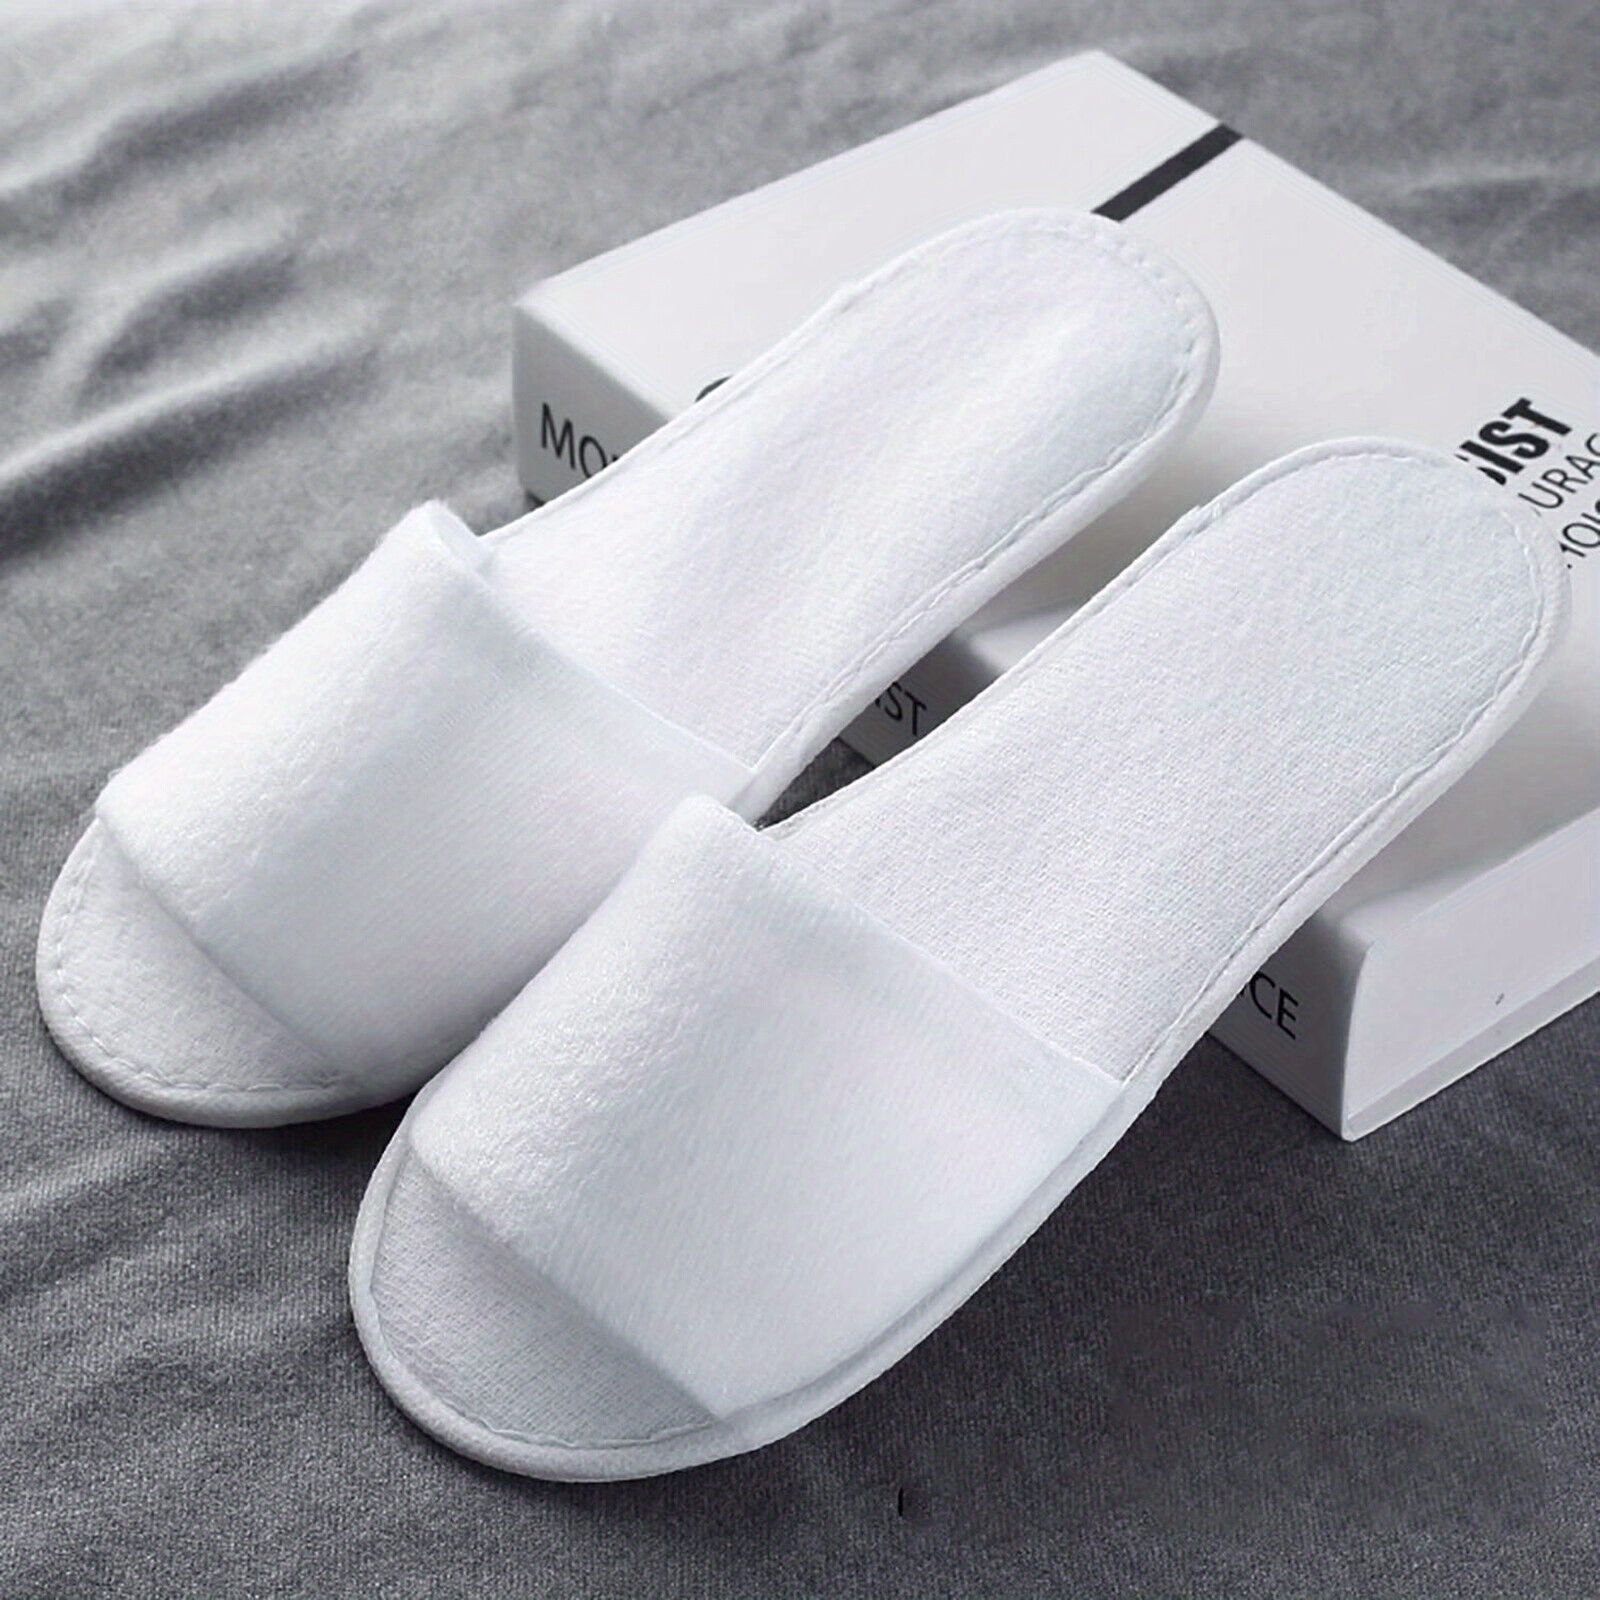  Spa Slippers, Disposable Slippers For Guests Bulk Of 6 Pairs  - Non-Slip Closed-Toe Premium White Spa